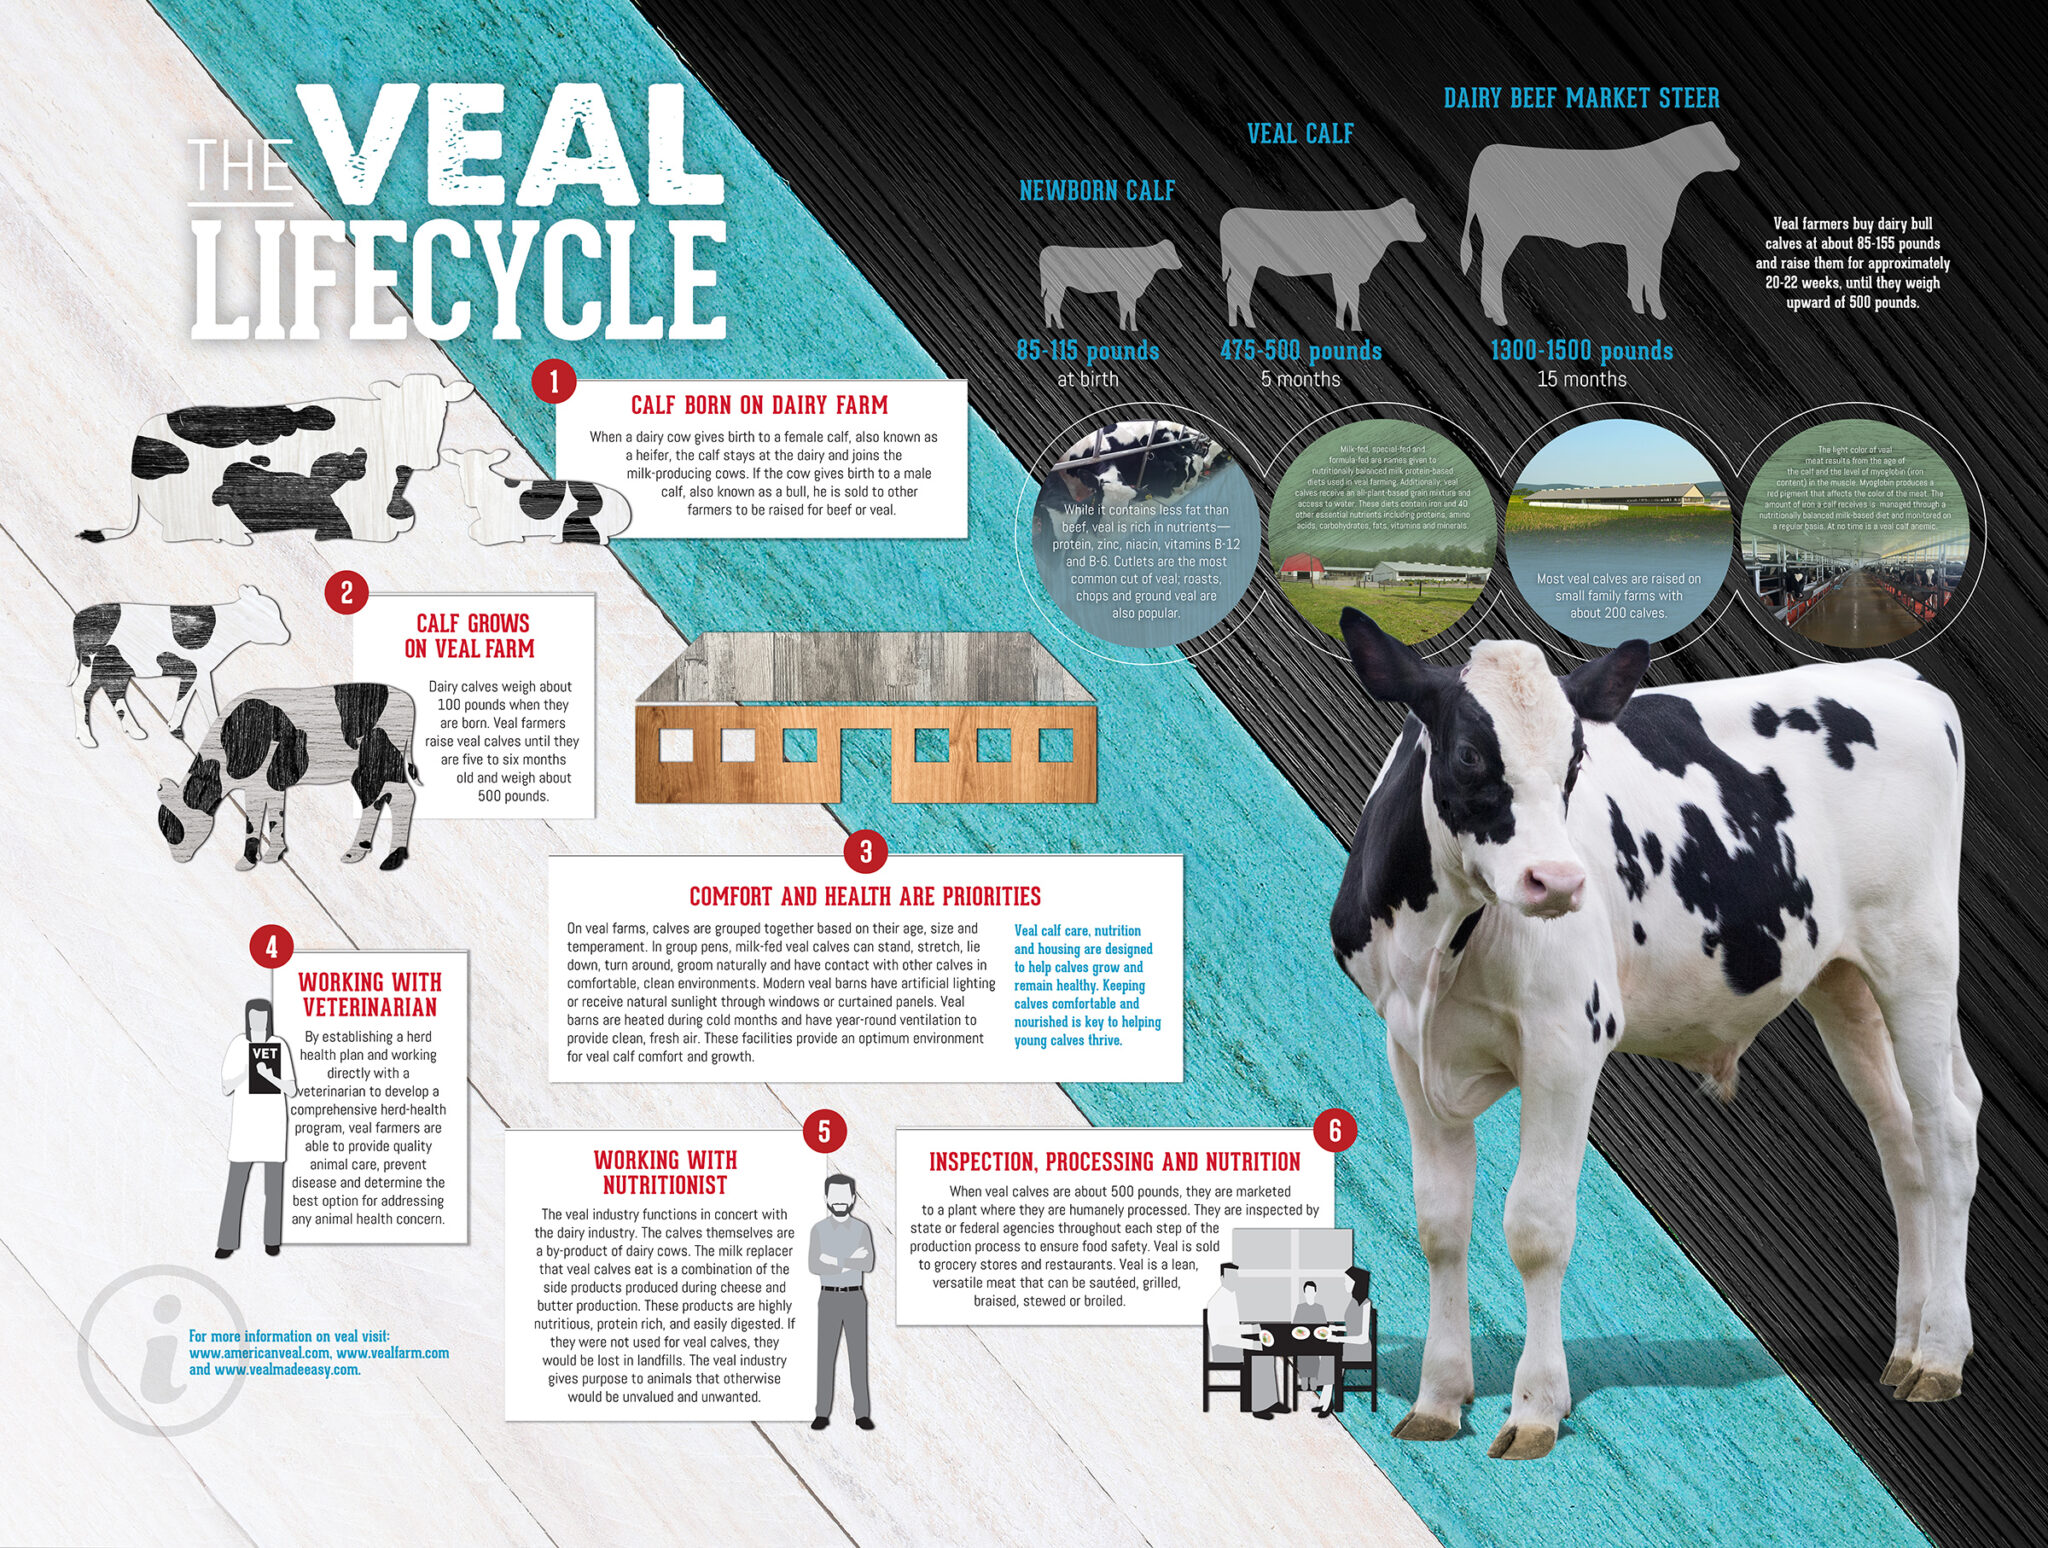 where does veal come from and how do cattle farmers make veal